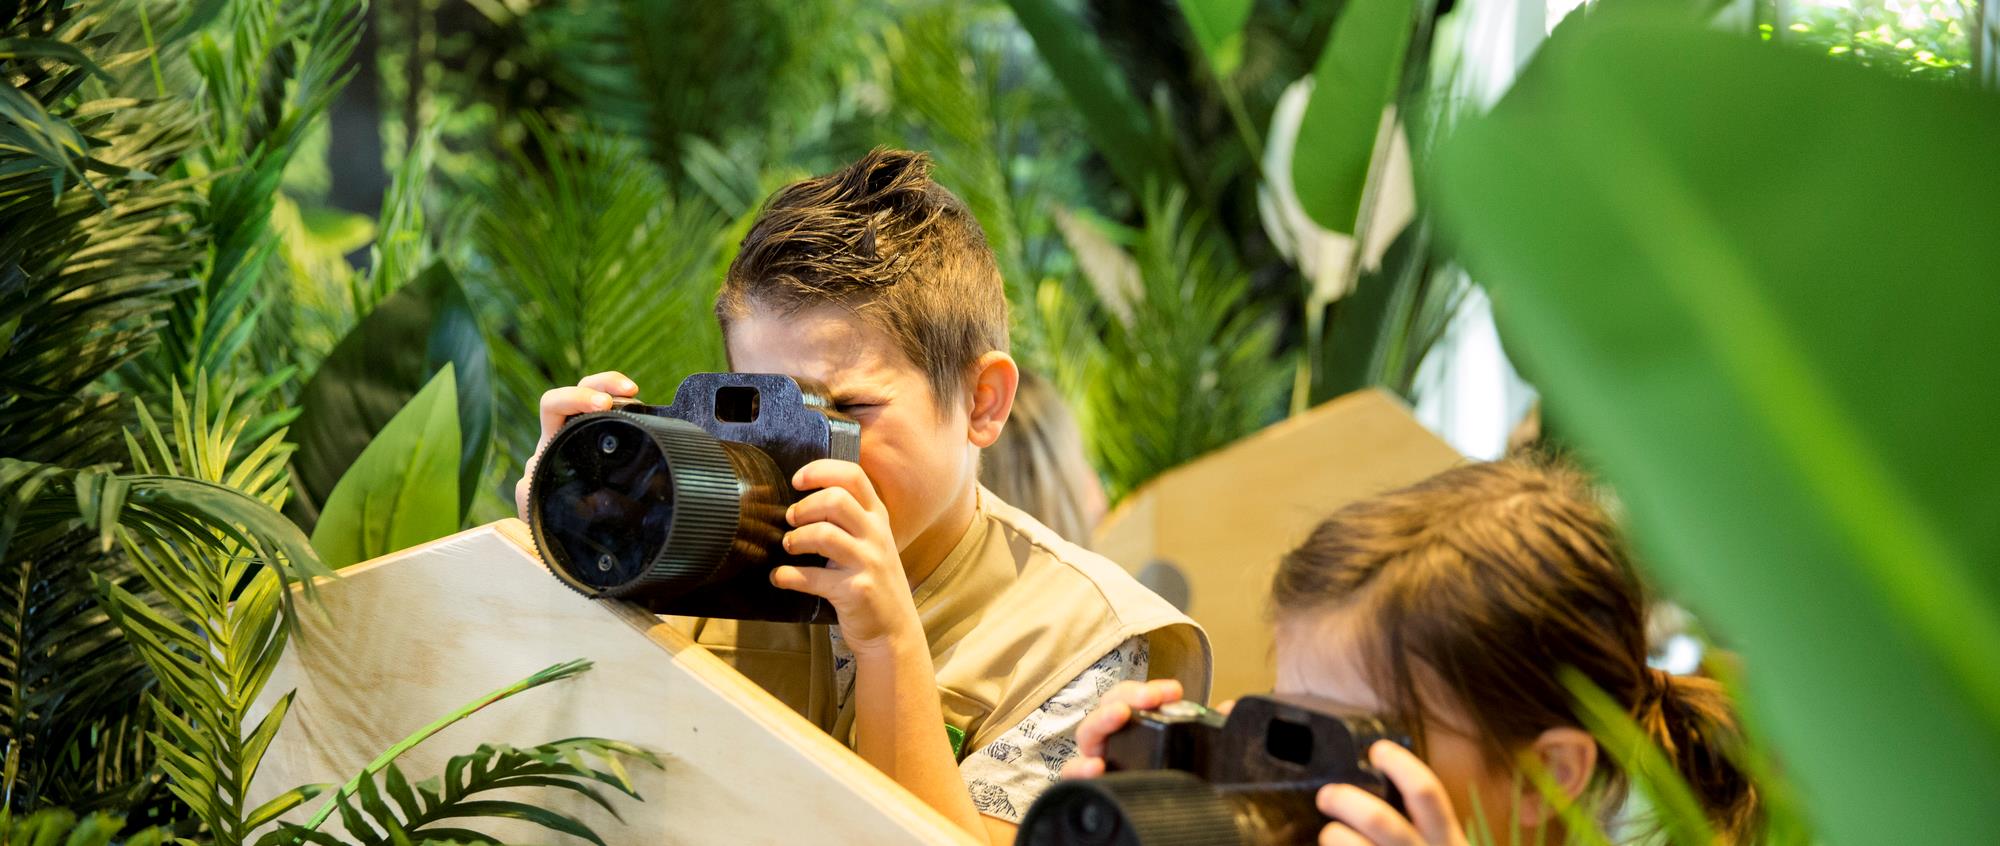 Two young guests, dressed as keepers and holding cameras, ready to take photos within a jungle setting.